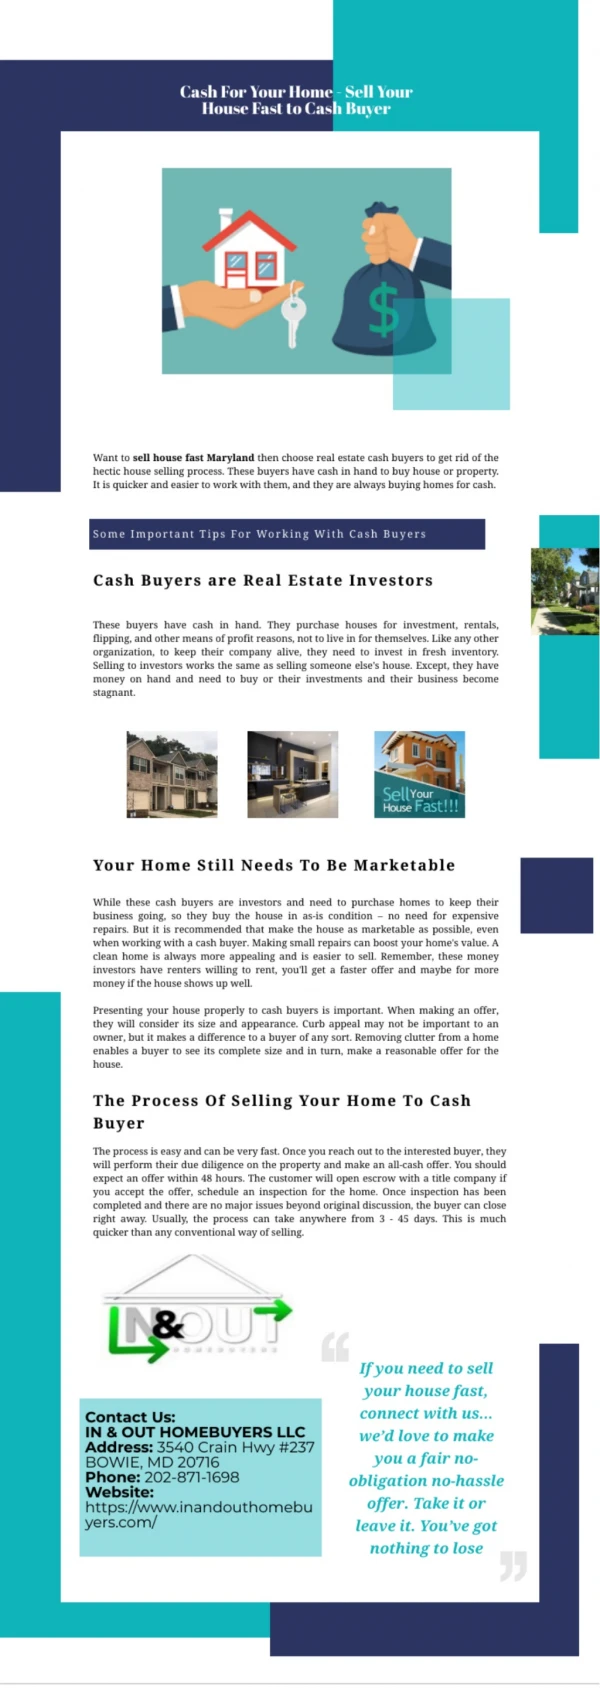 Cash For Your Home - Sell Your House Fast to Cash Buyer